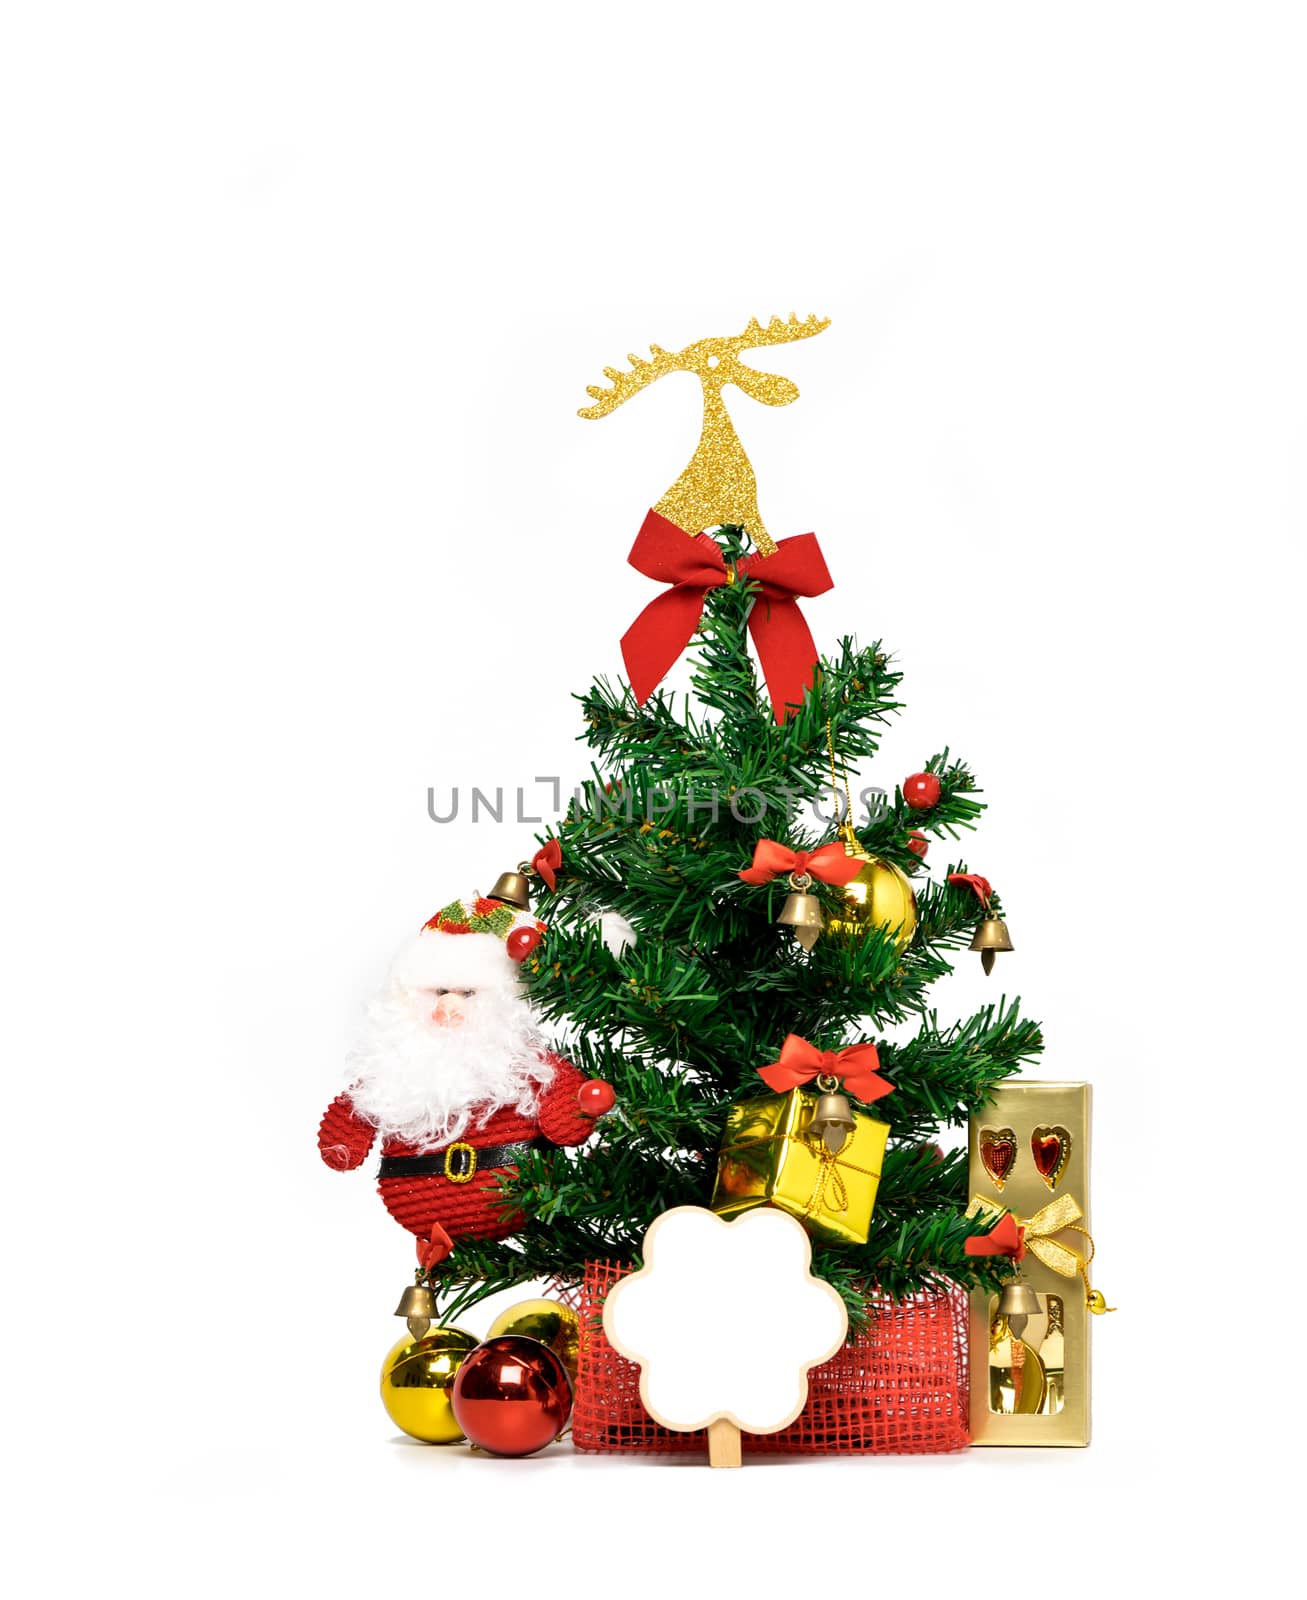 Christmas tree decorated with ribbon, card, fork and spoon in golden gift box, Santa Claus and ball on white background with copy space, just add your own text by Fahroni